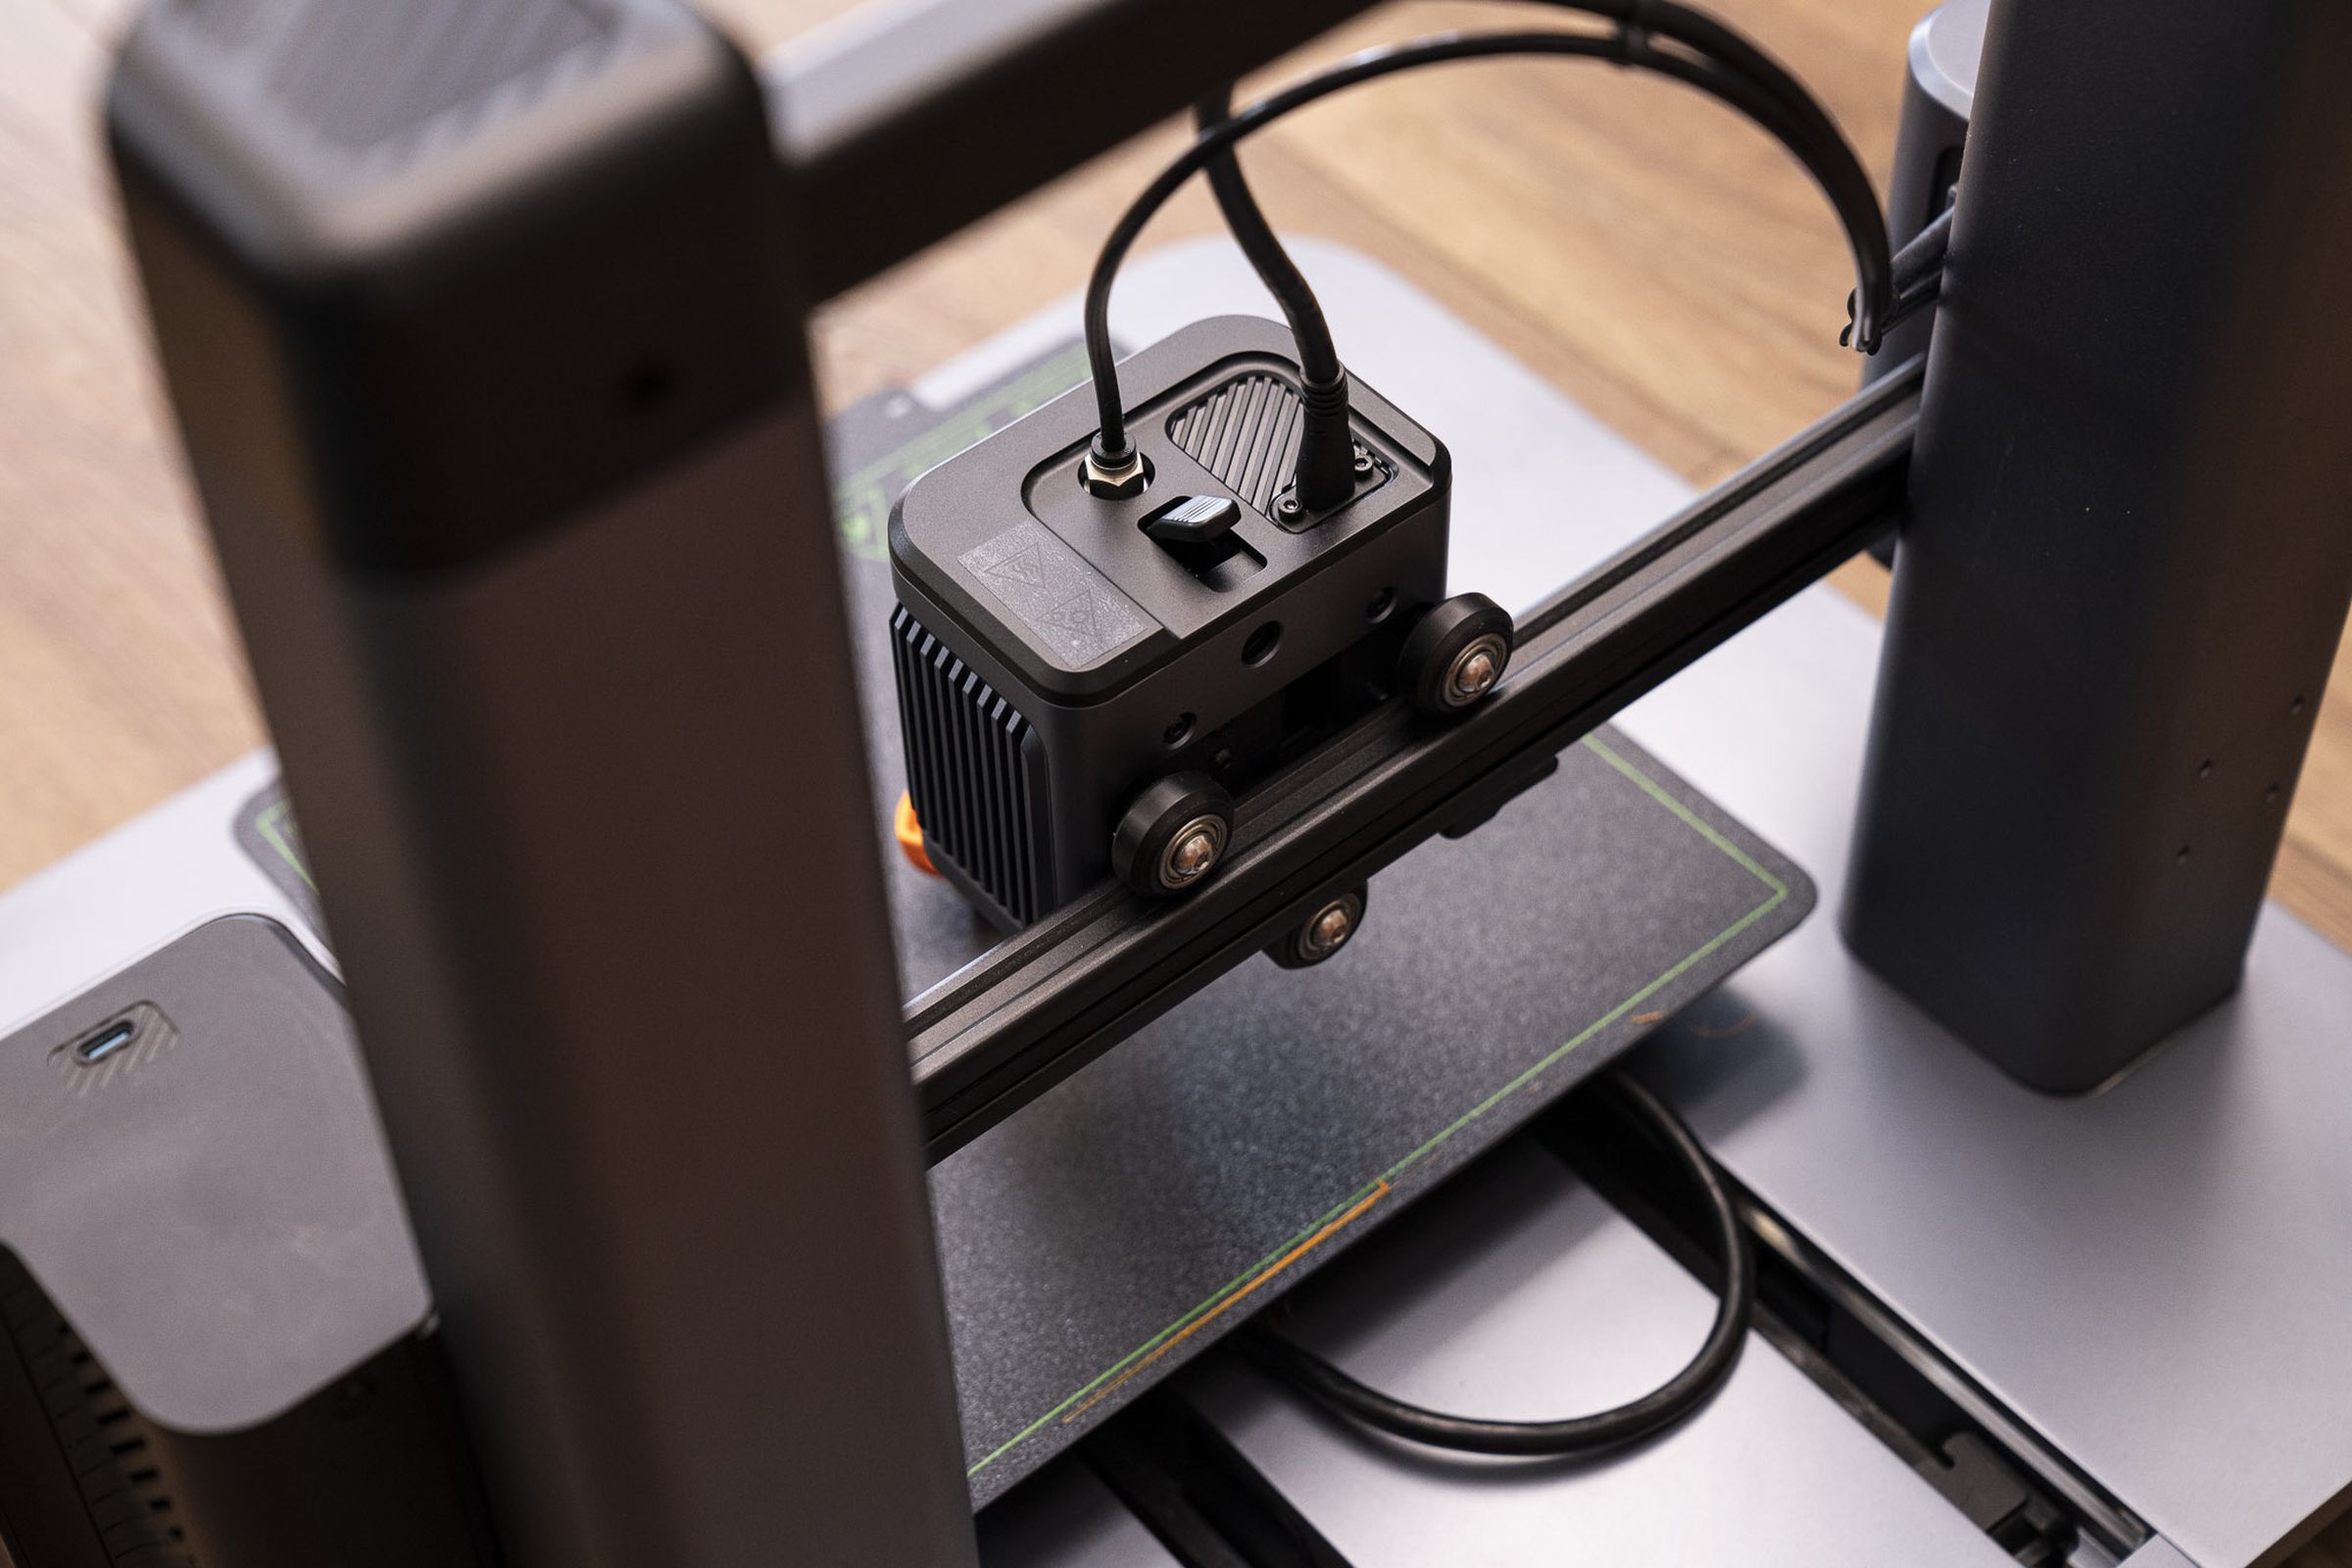 The AnkerMake M5’s extruder can travel up to 500mm/s during a print job, but speed can be a double-edged sword.